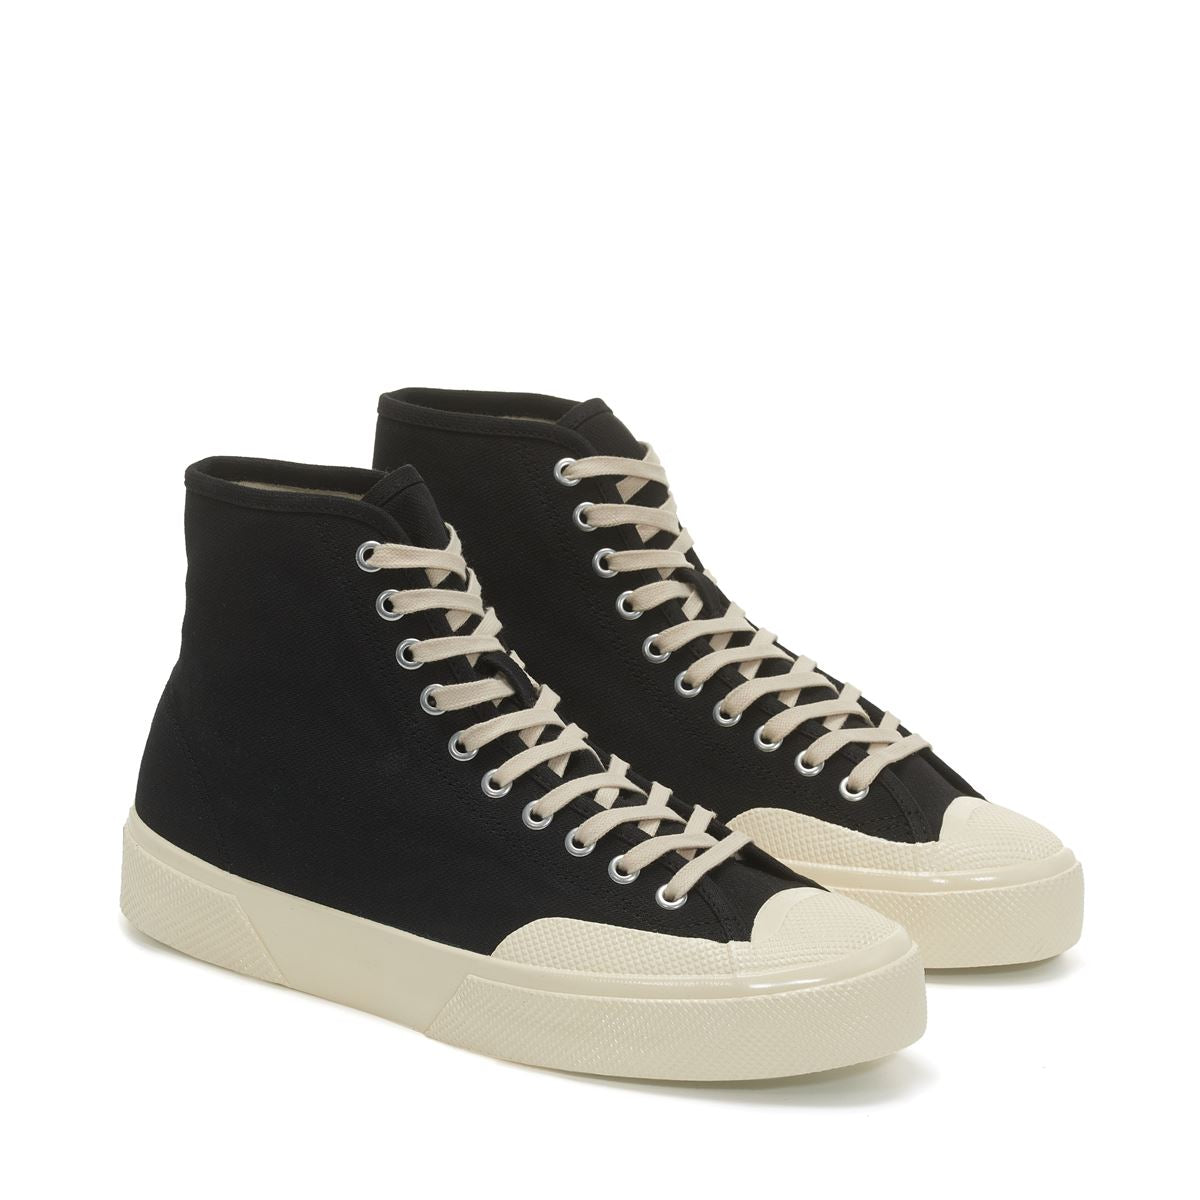 Superga 2433 Workwear Sneakers - Black Off White. Front view.